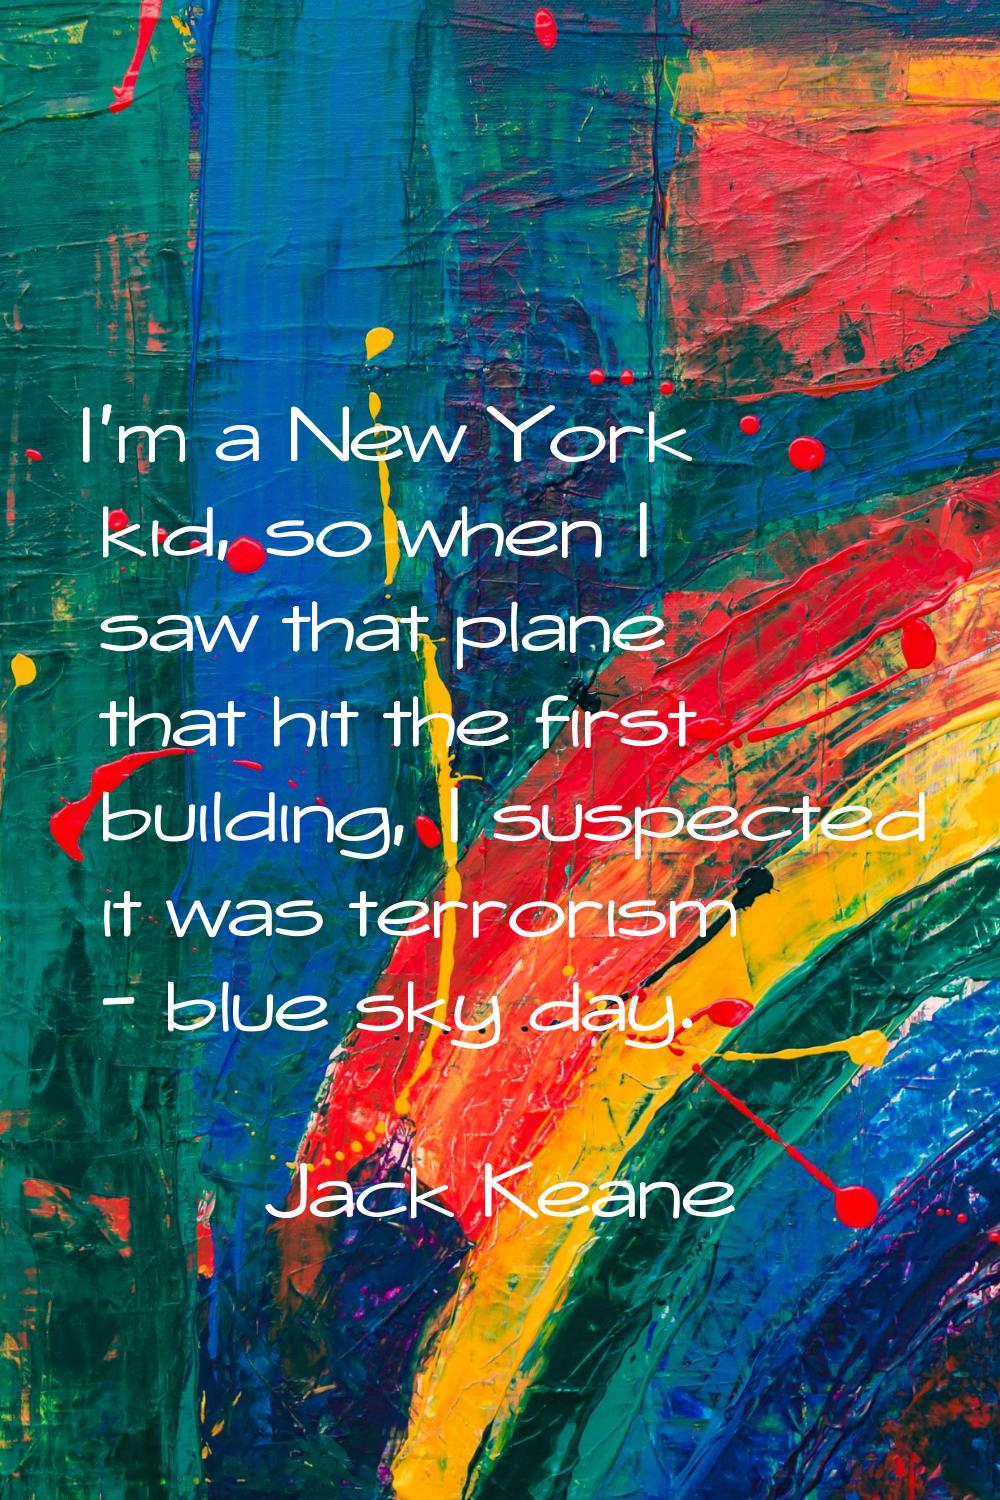 I'm a New York kid, so when I saw that plane that hit the first building, I suspected it was terror